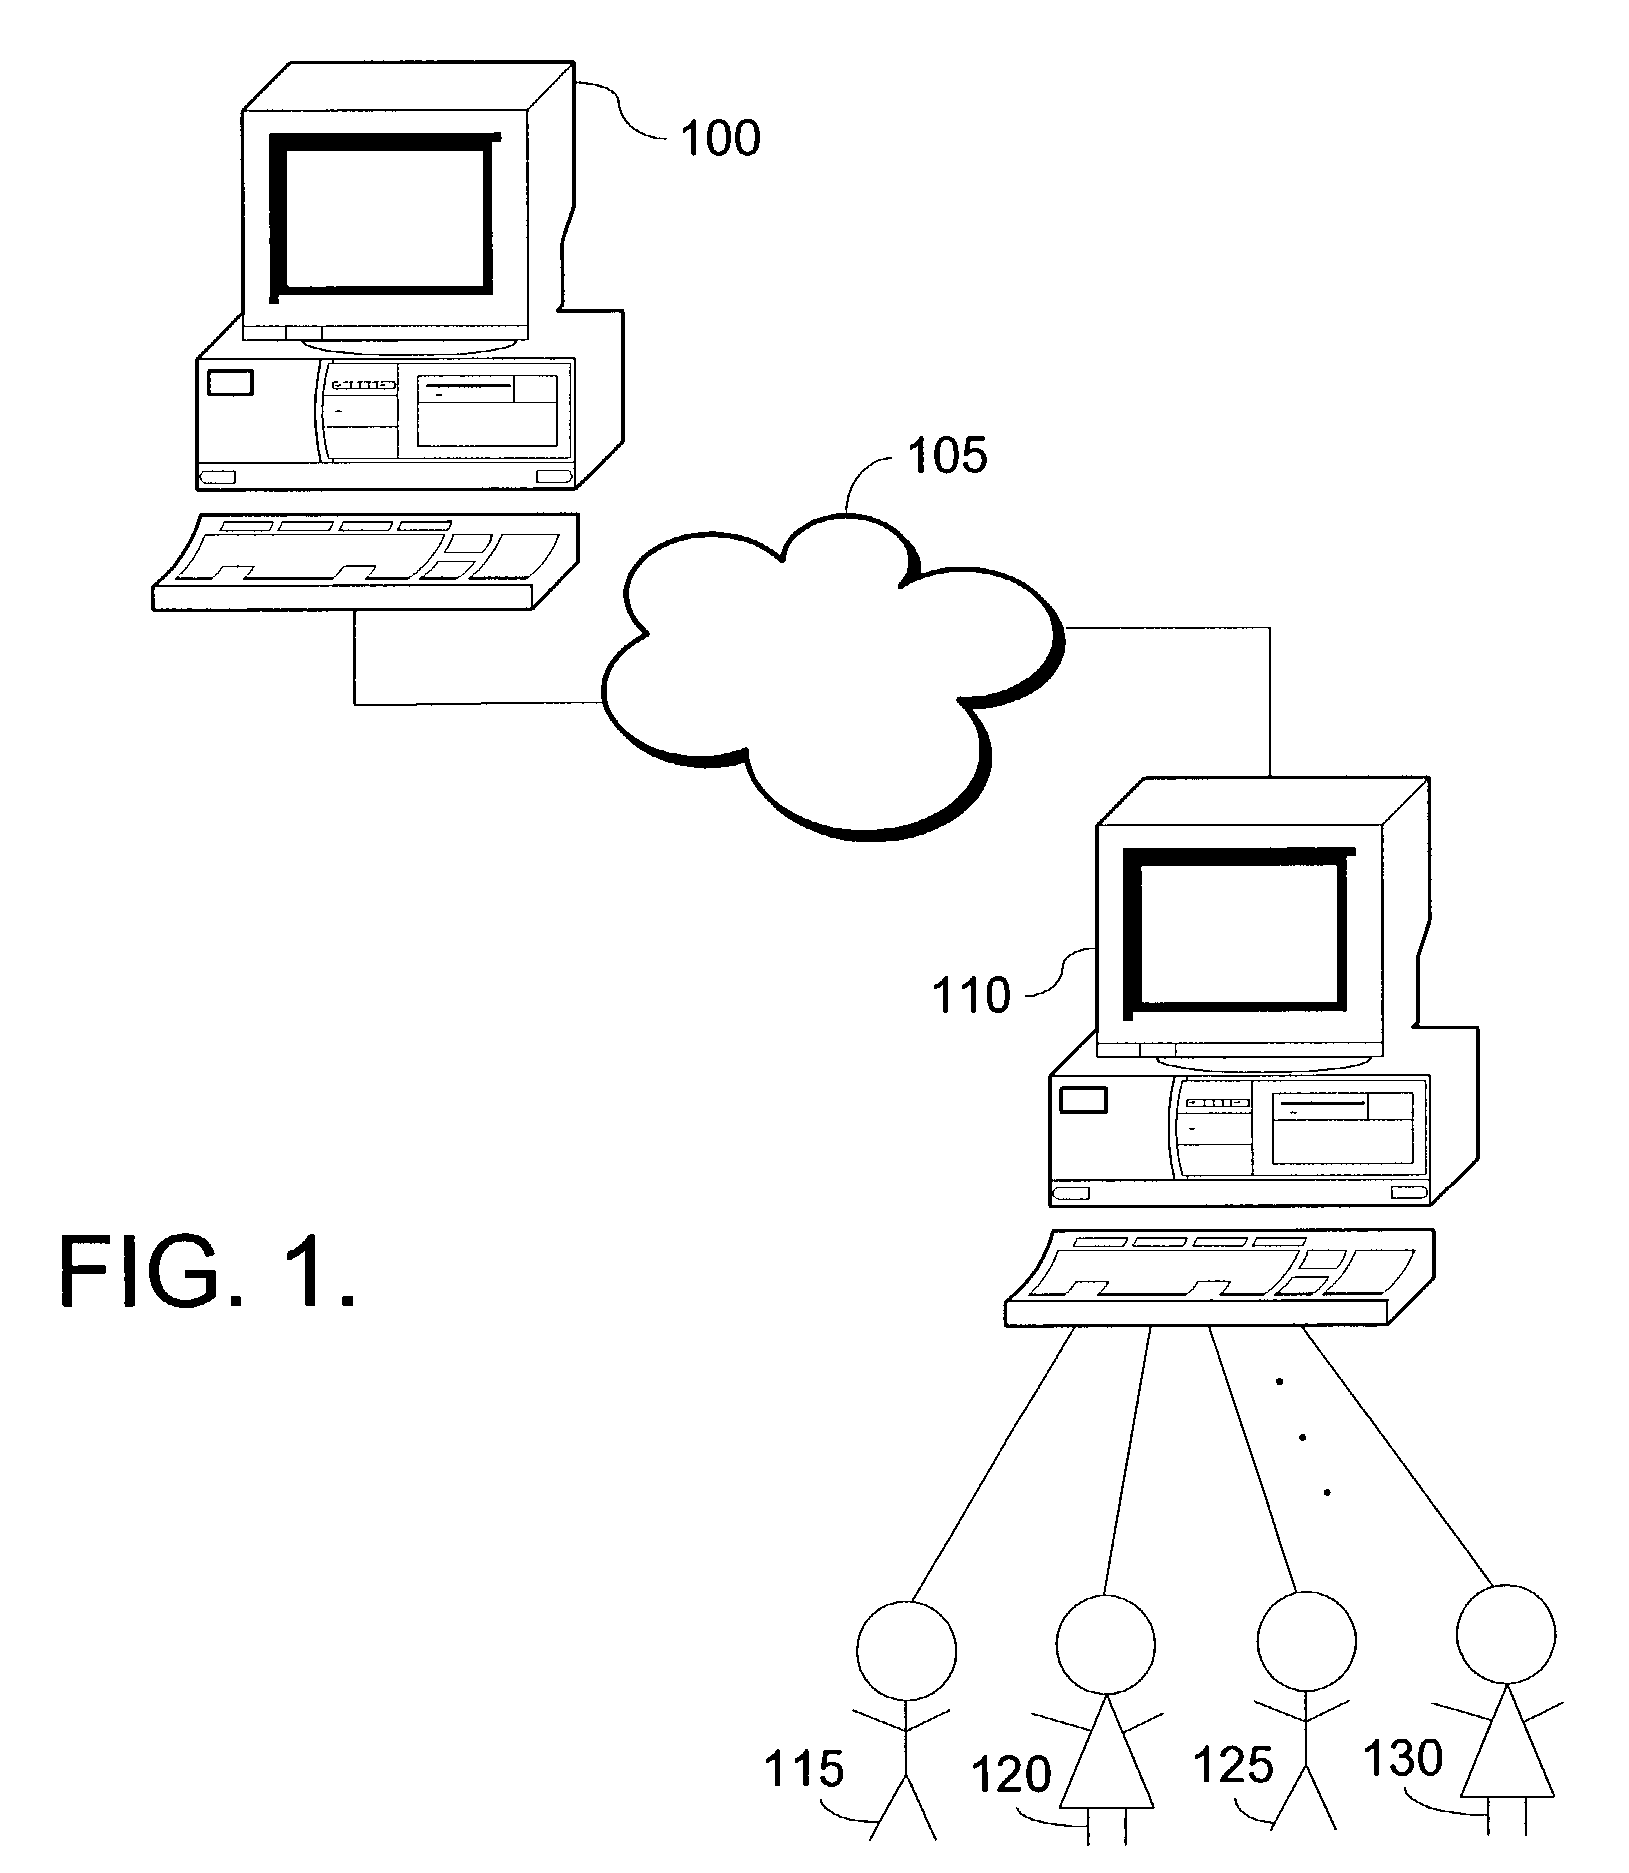 Method for routing electronic correspondence based on the level and type of emotion contained therein